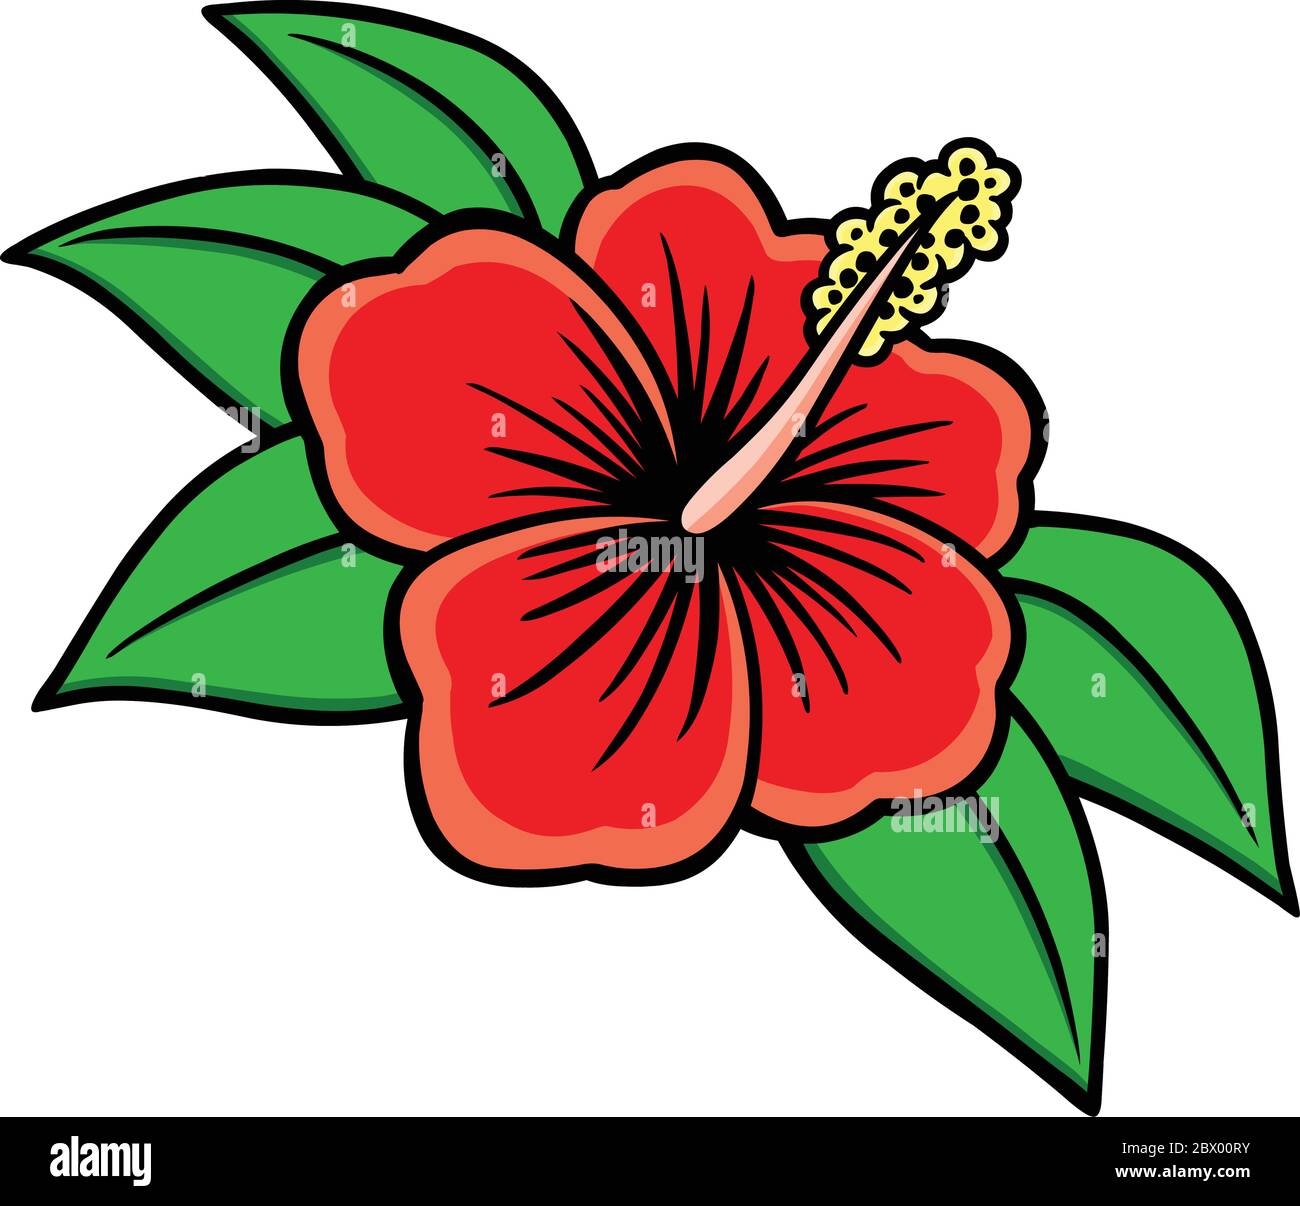 Hibiscus- An Illustration of a Hibiscus Flower. Stock Vector